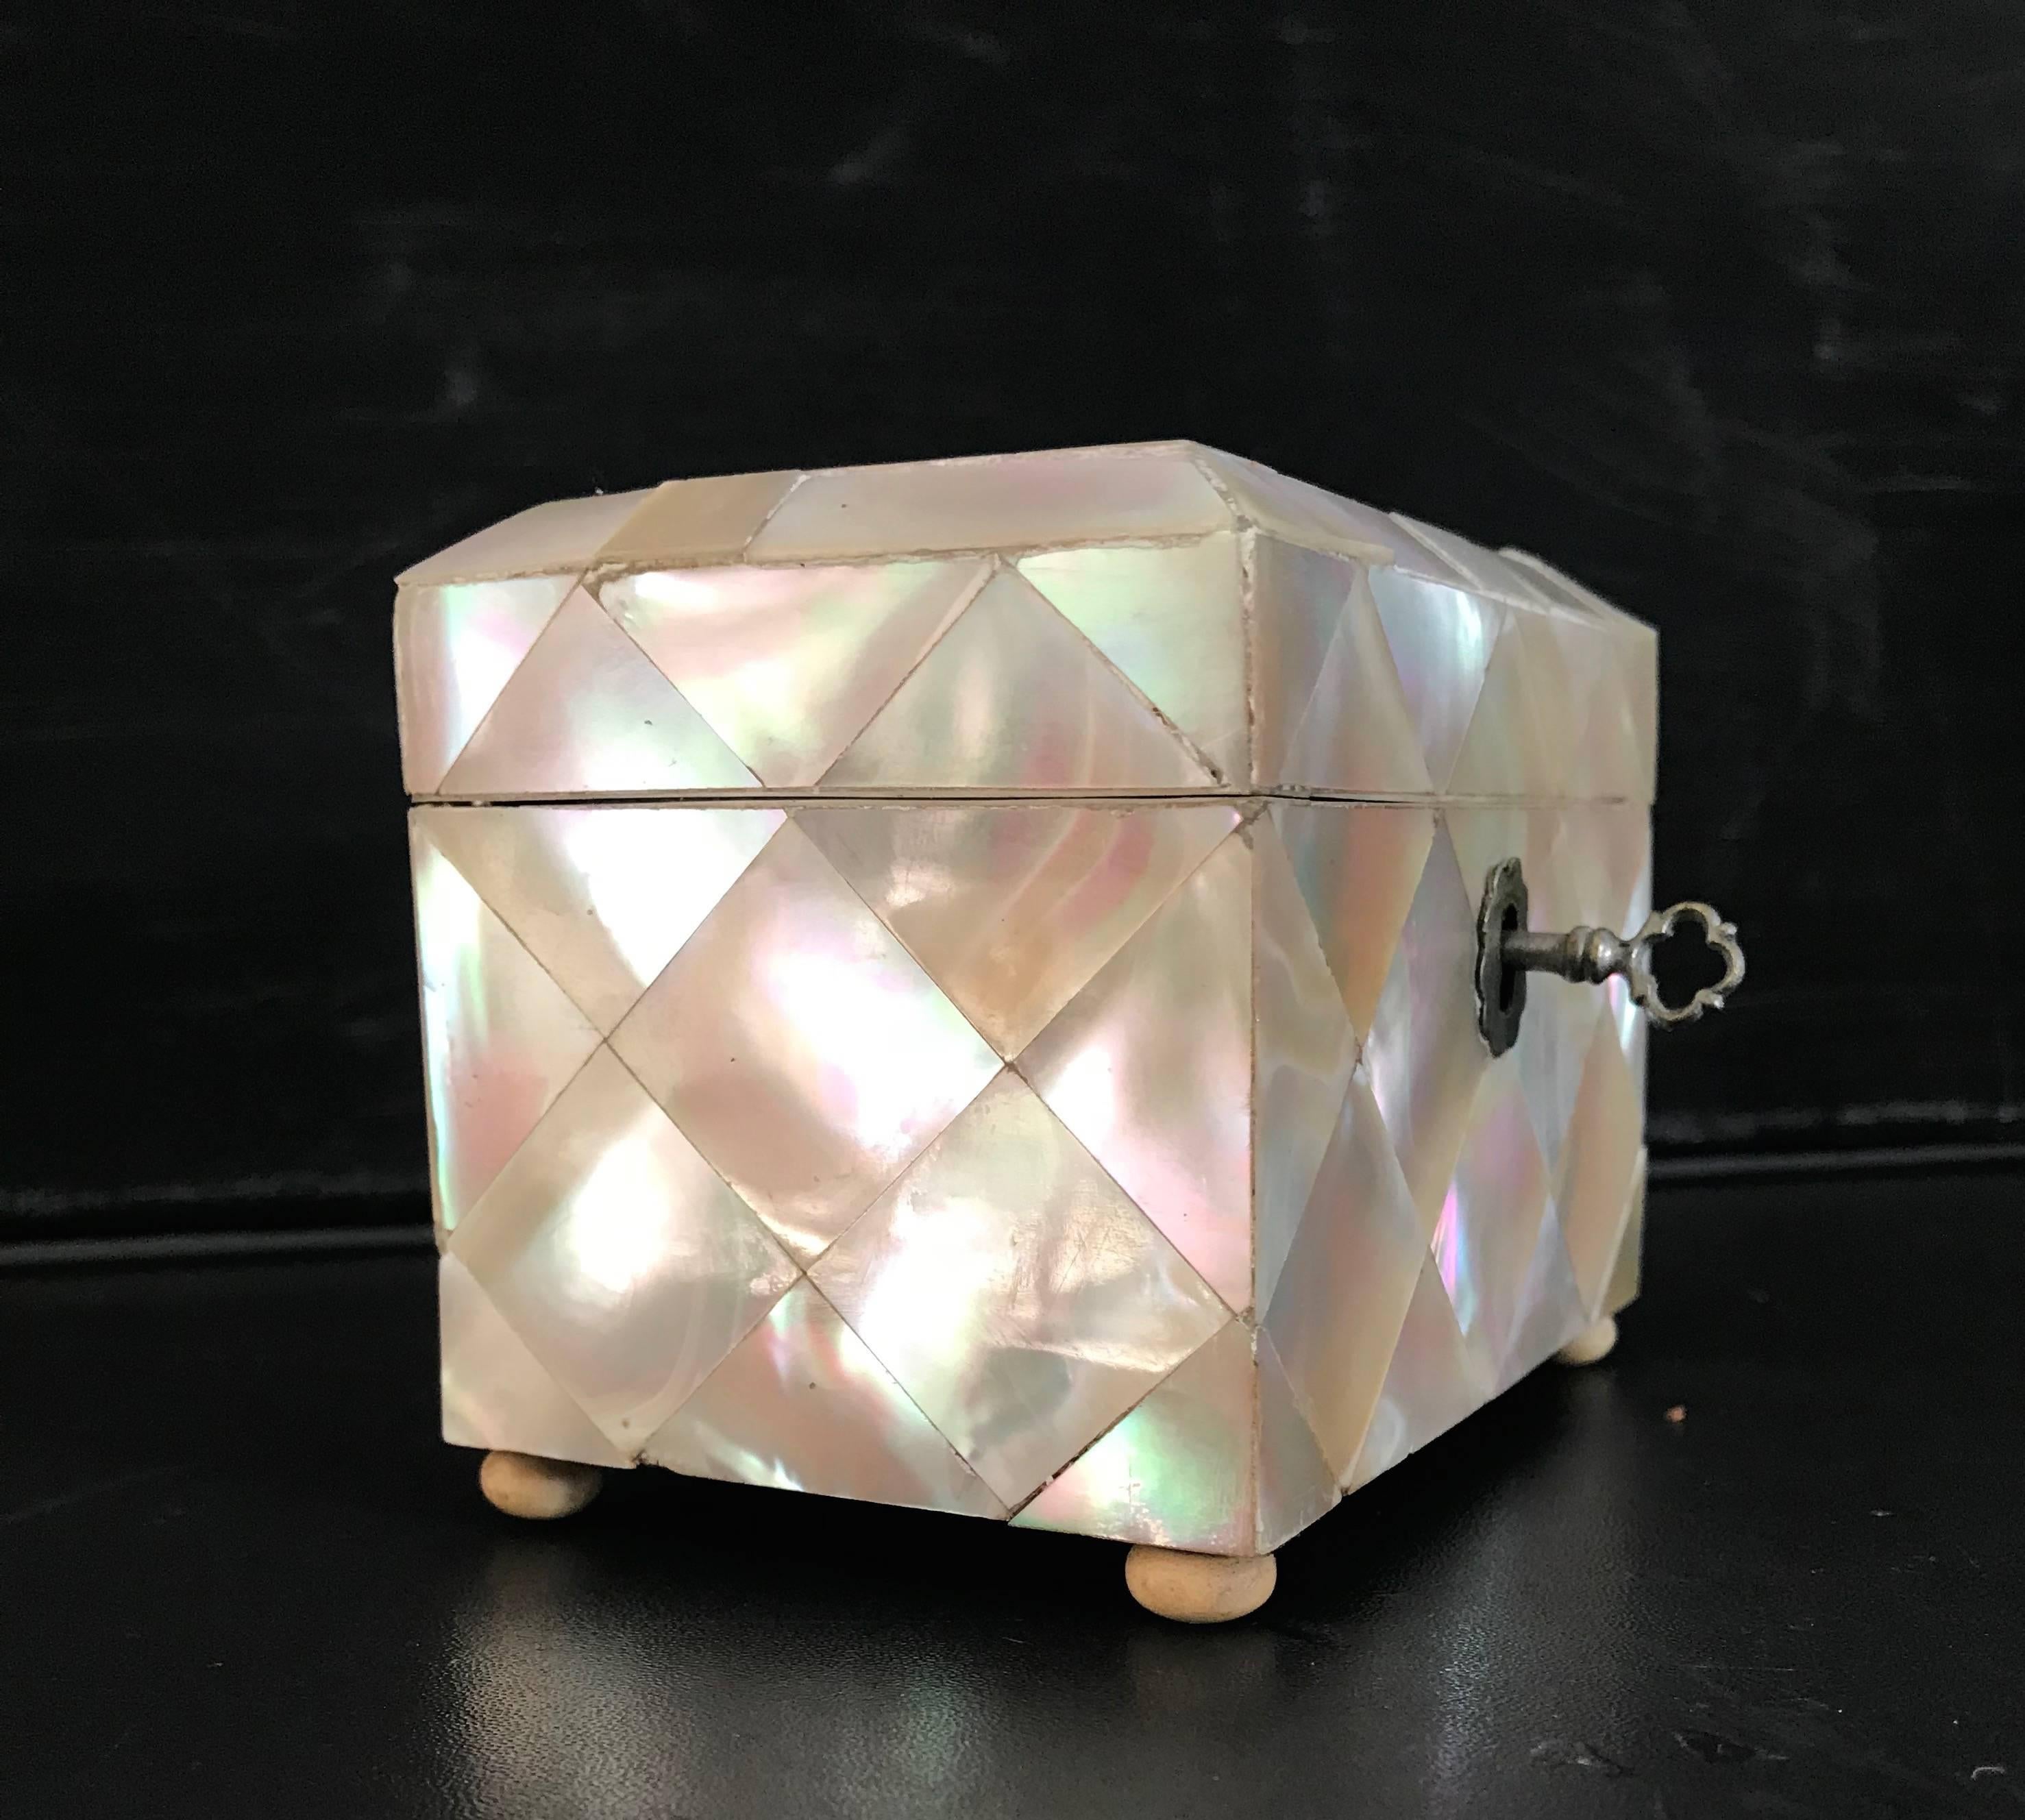 European 19th Century Antique Mother-of-pearl Tea Caddy Box with Silver Lock & Hinges